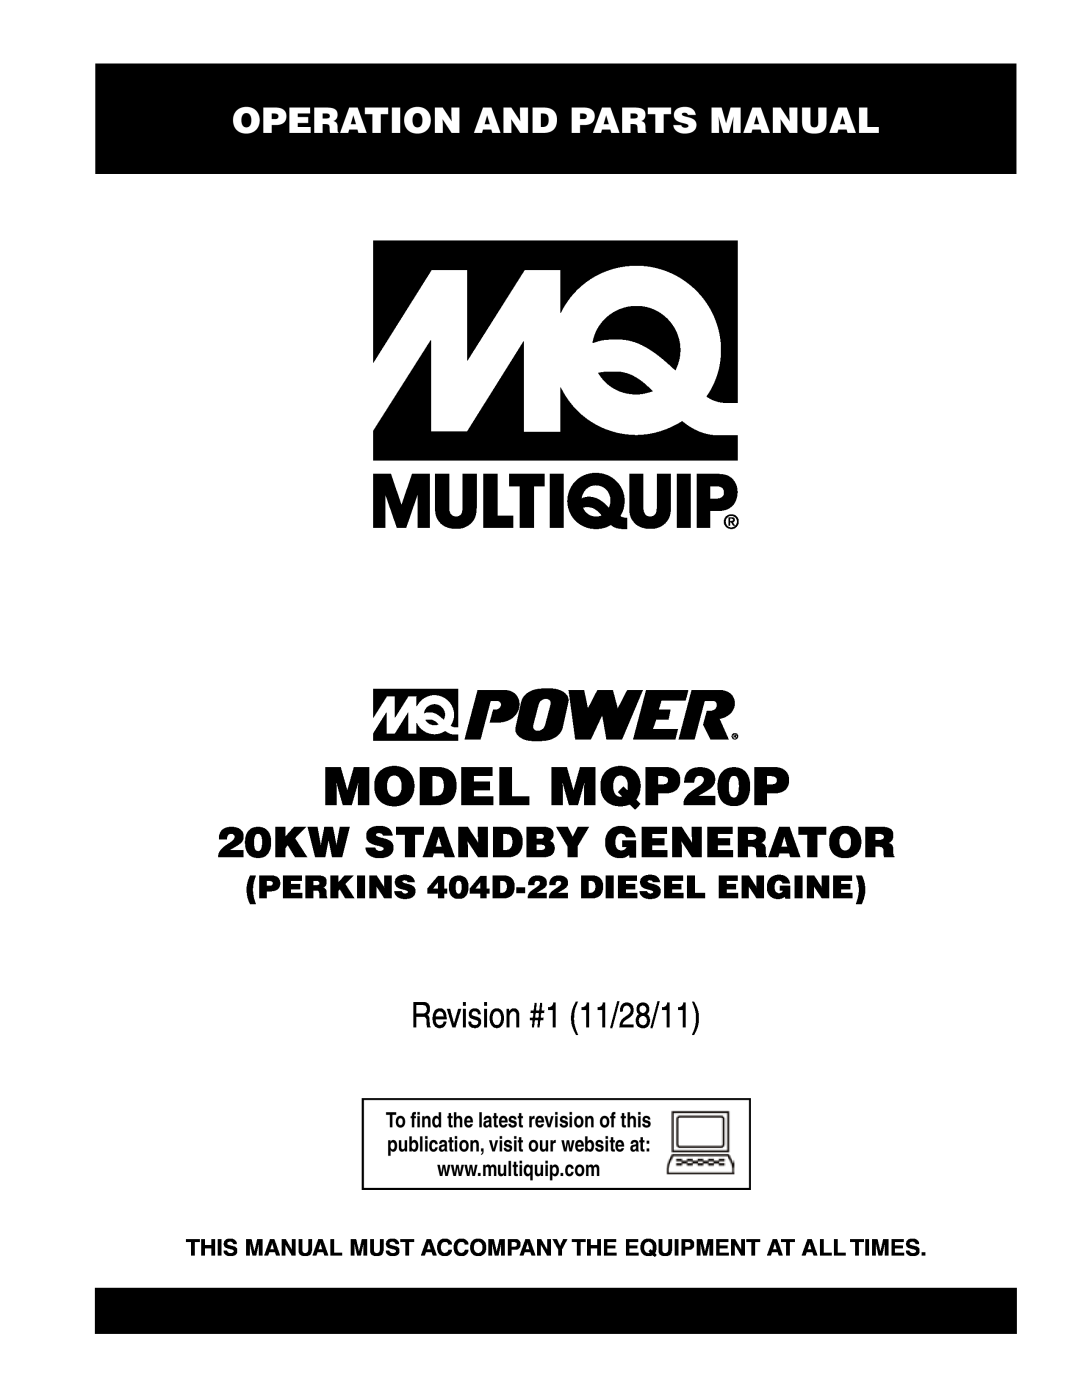 Multiquip manual Operation and Parts Manual, This Manual Must Accompany The Equipment At All Times, MODEL MQP20P 